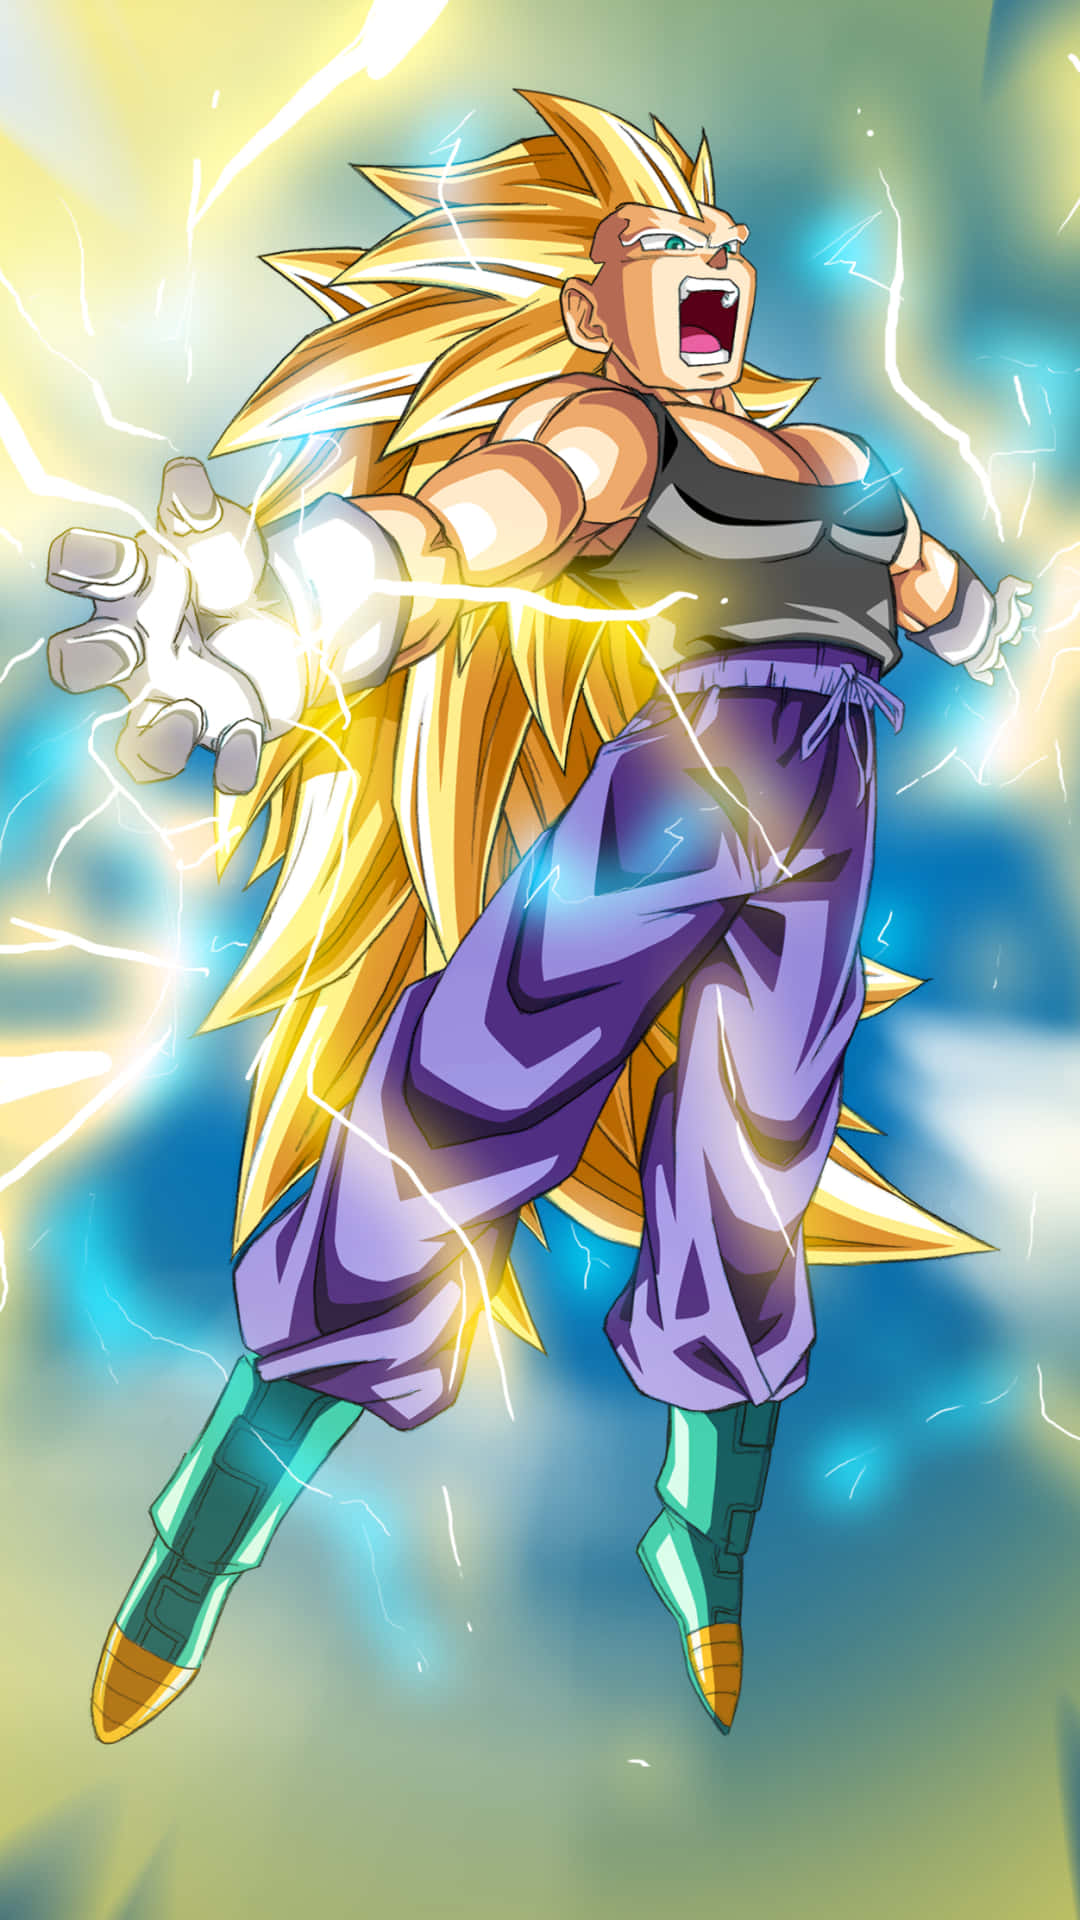 Unlock the mysterious power of Super Saiyan 3 with this HD wallpaper Wallpaper